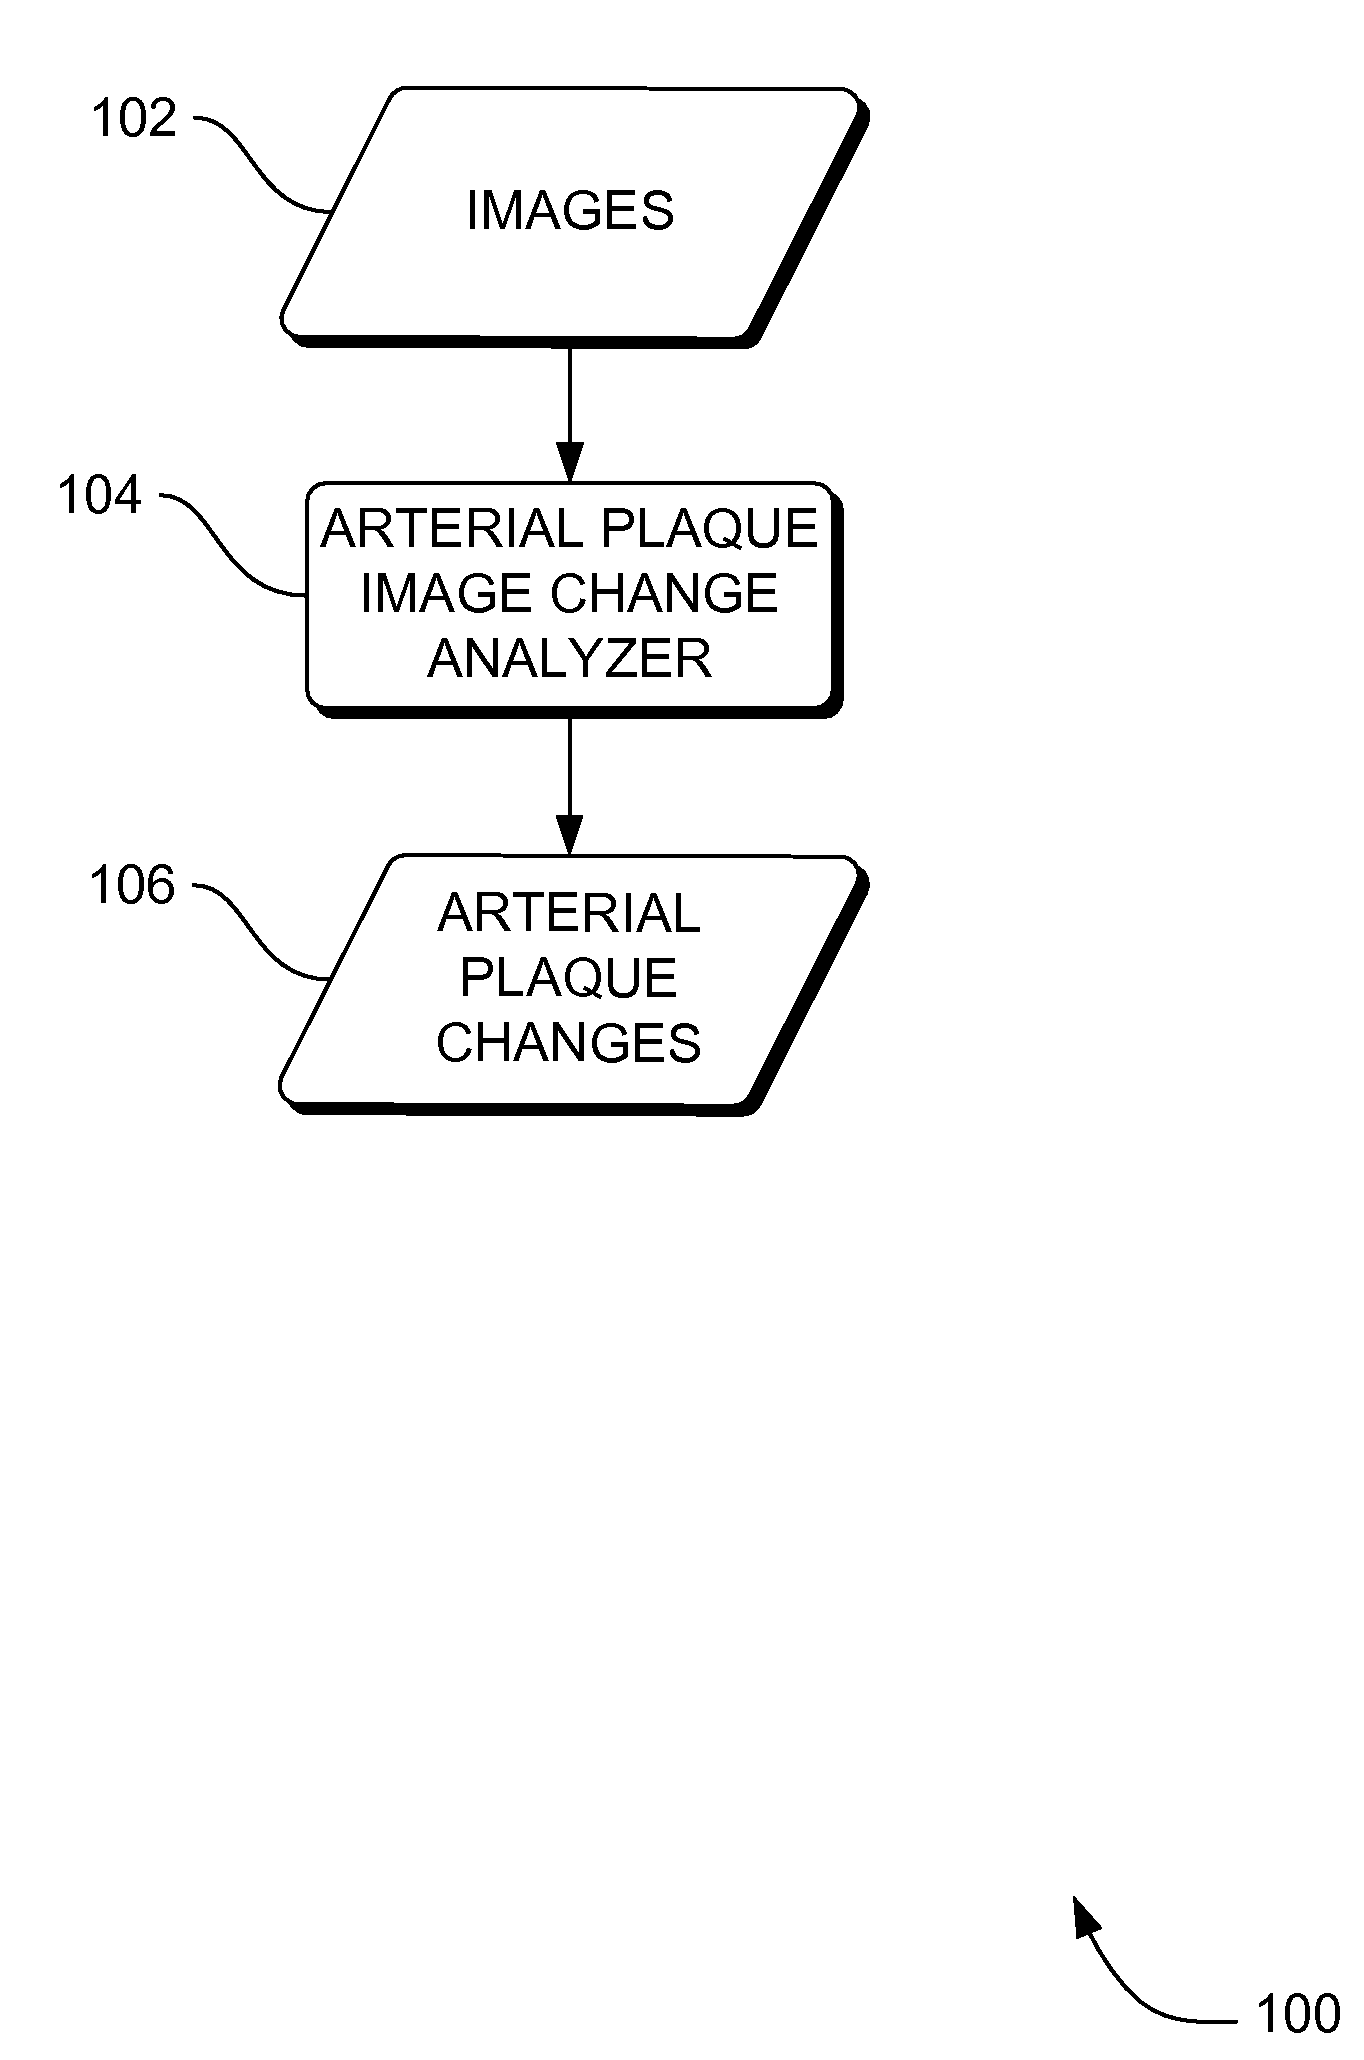 Systems, methods and apparatus for longitudinal/temporal analysis of plaque lesions